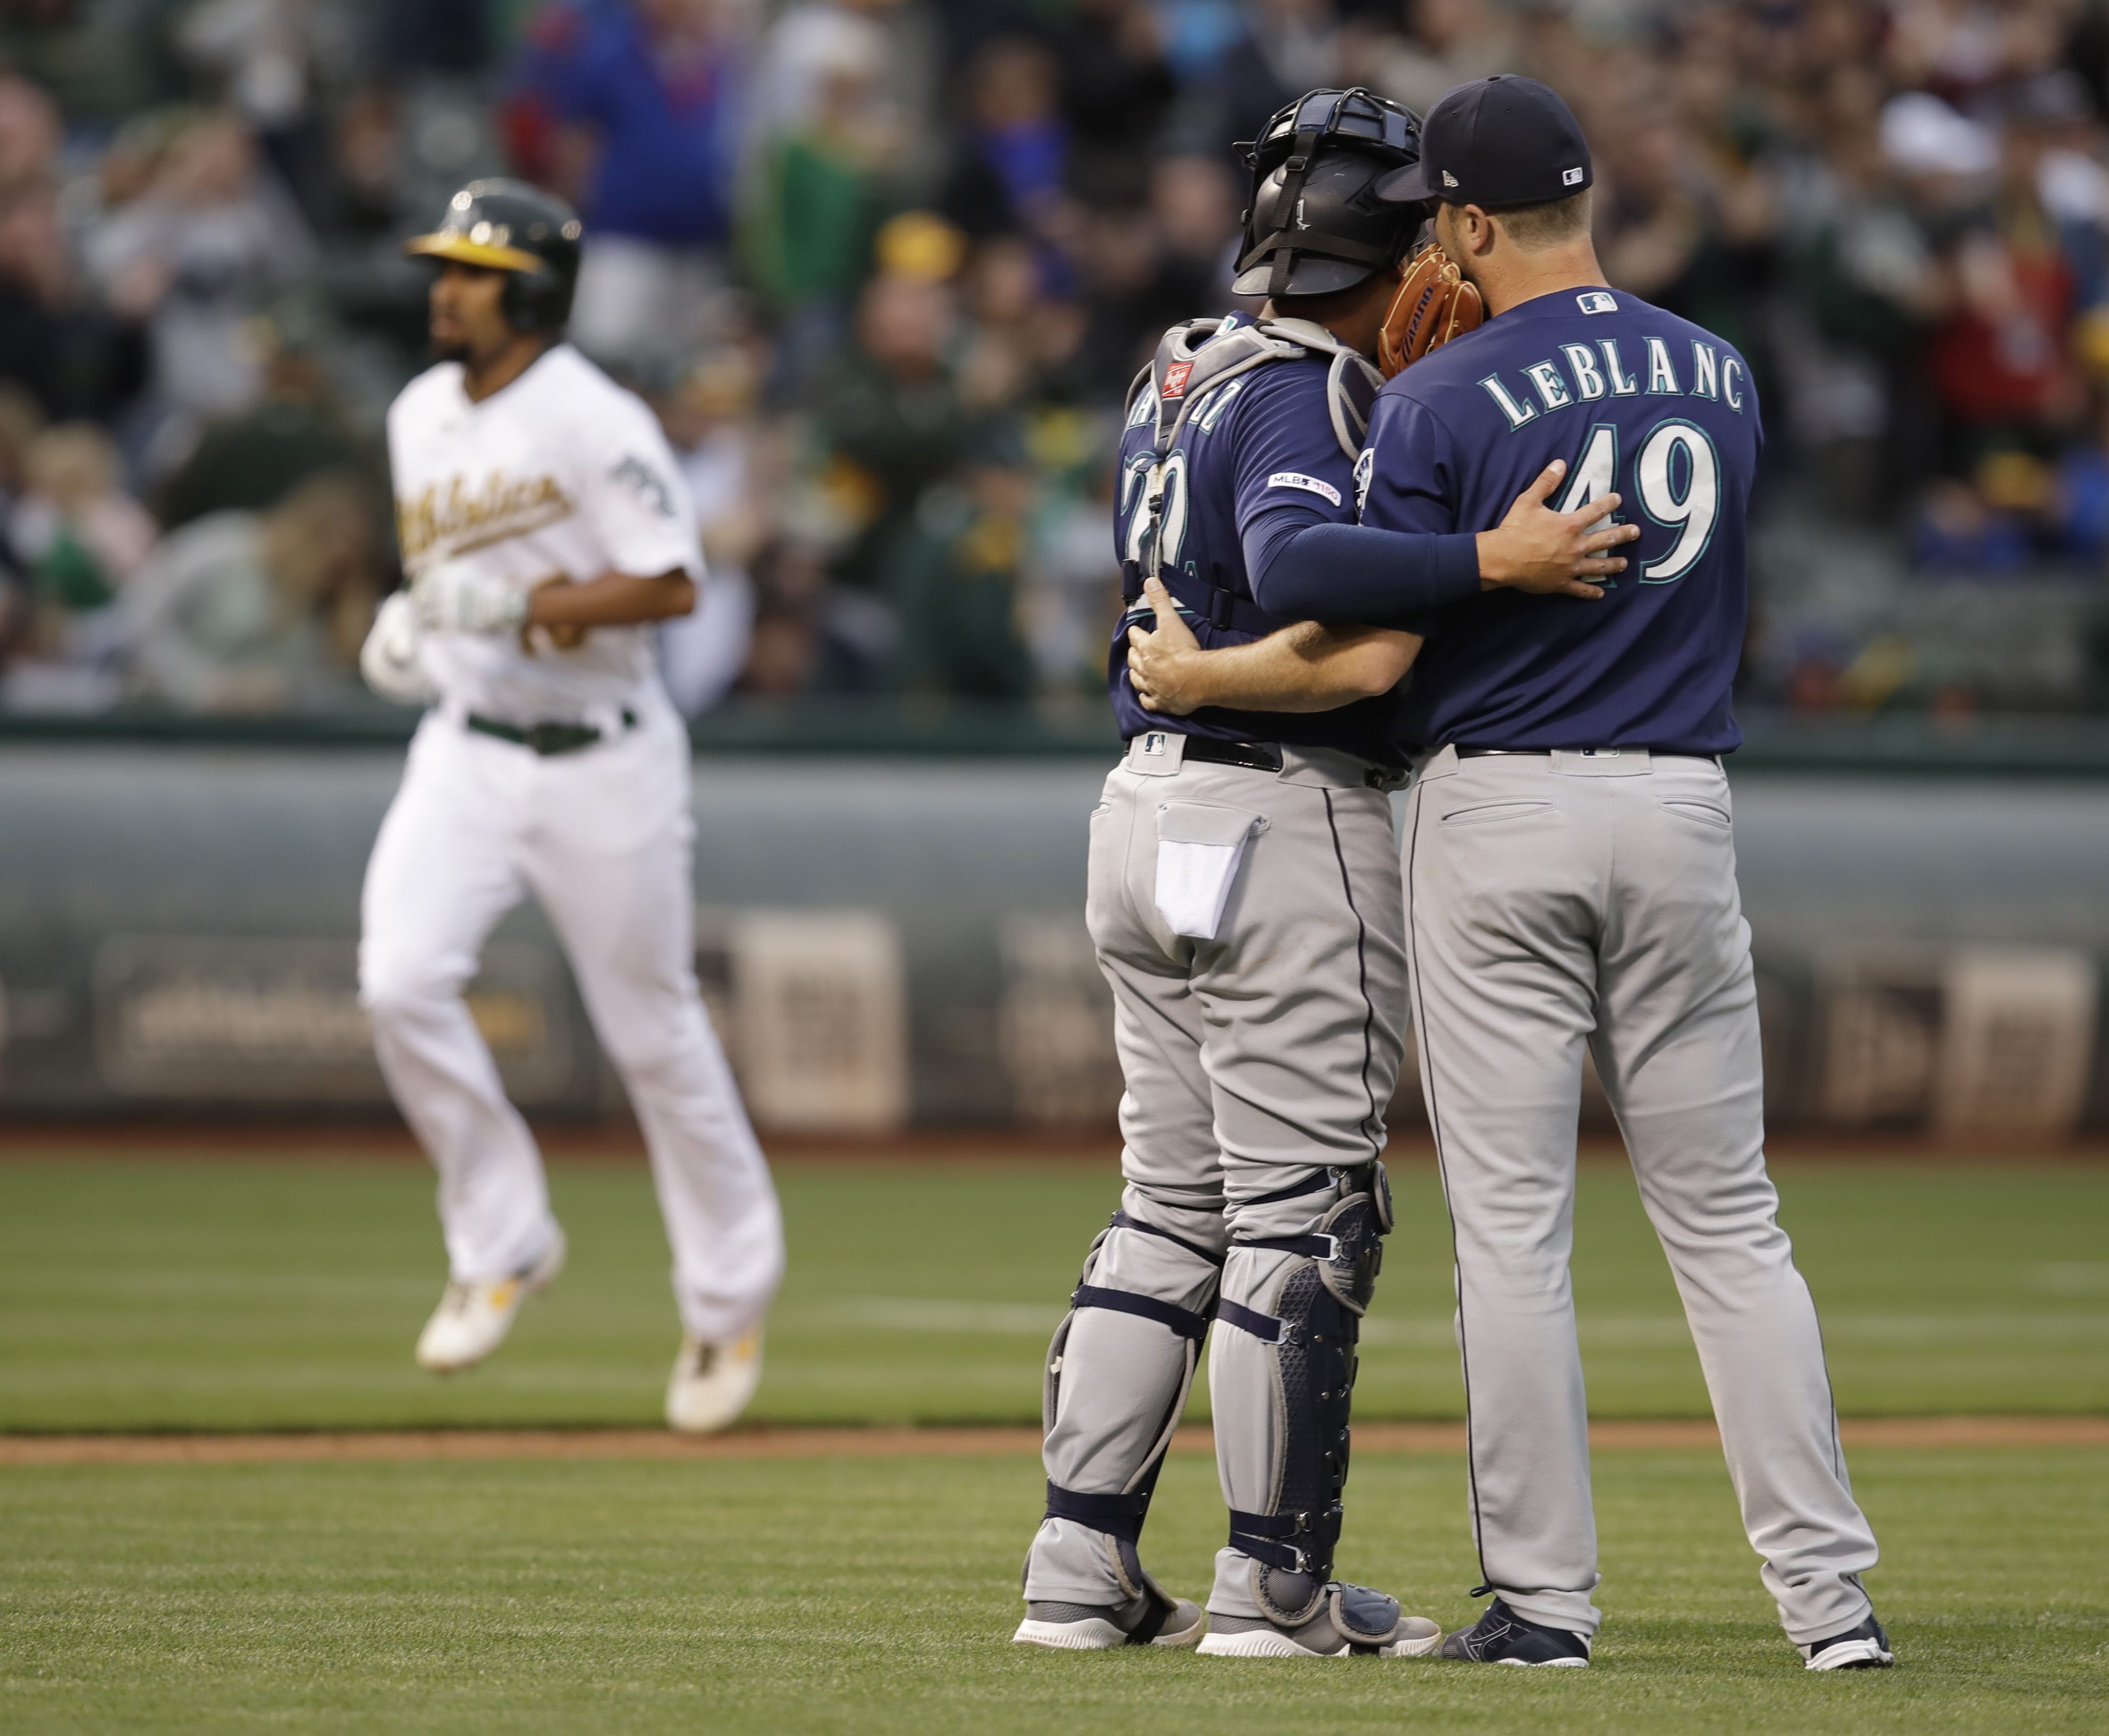 Seattle Mariners pitcher Wade LeBlanc, right, speaks with catcher Omar Narvaez as they wait for Oakland Athletics' Marcus Semien, back left, to run the bases after hitting a home run in the second inning of a baseball game Saturday, June 15, 2019, in Oakland, Calif.